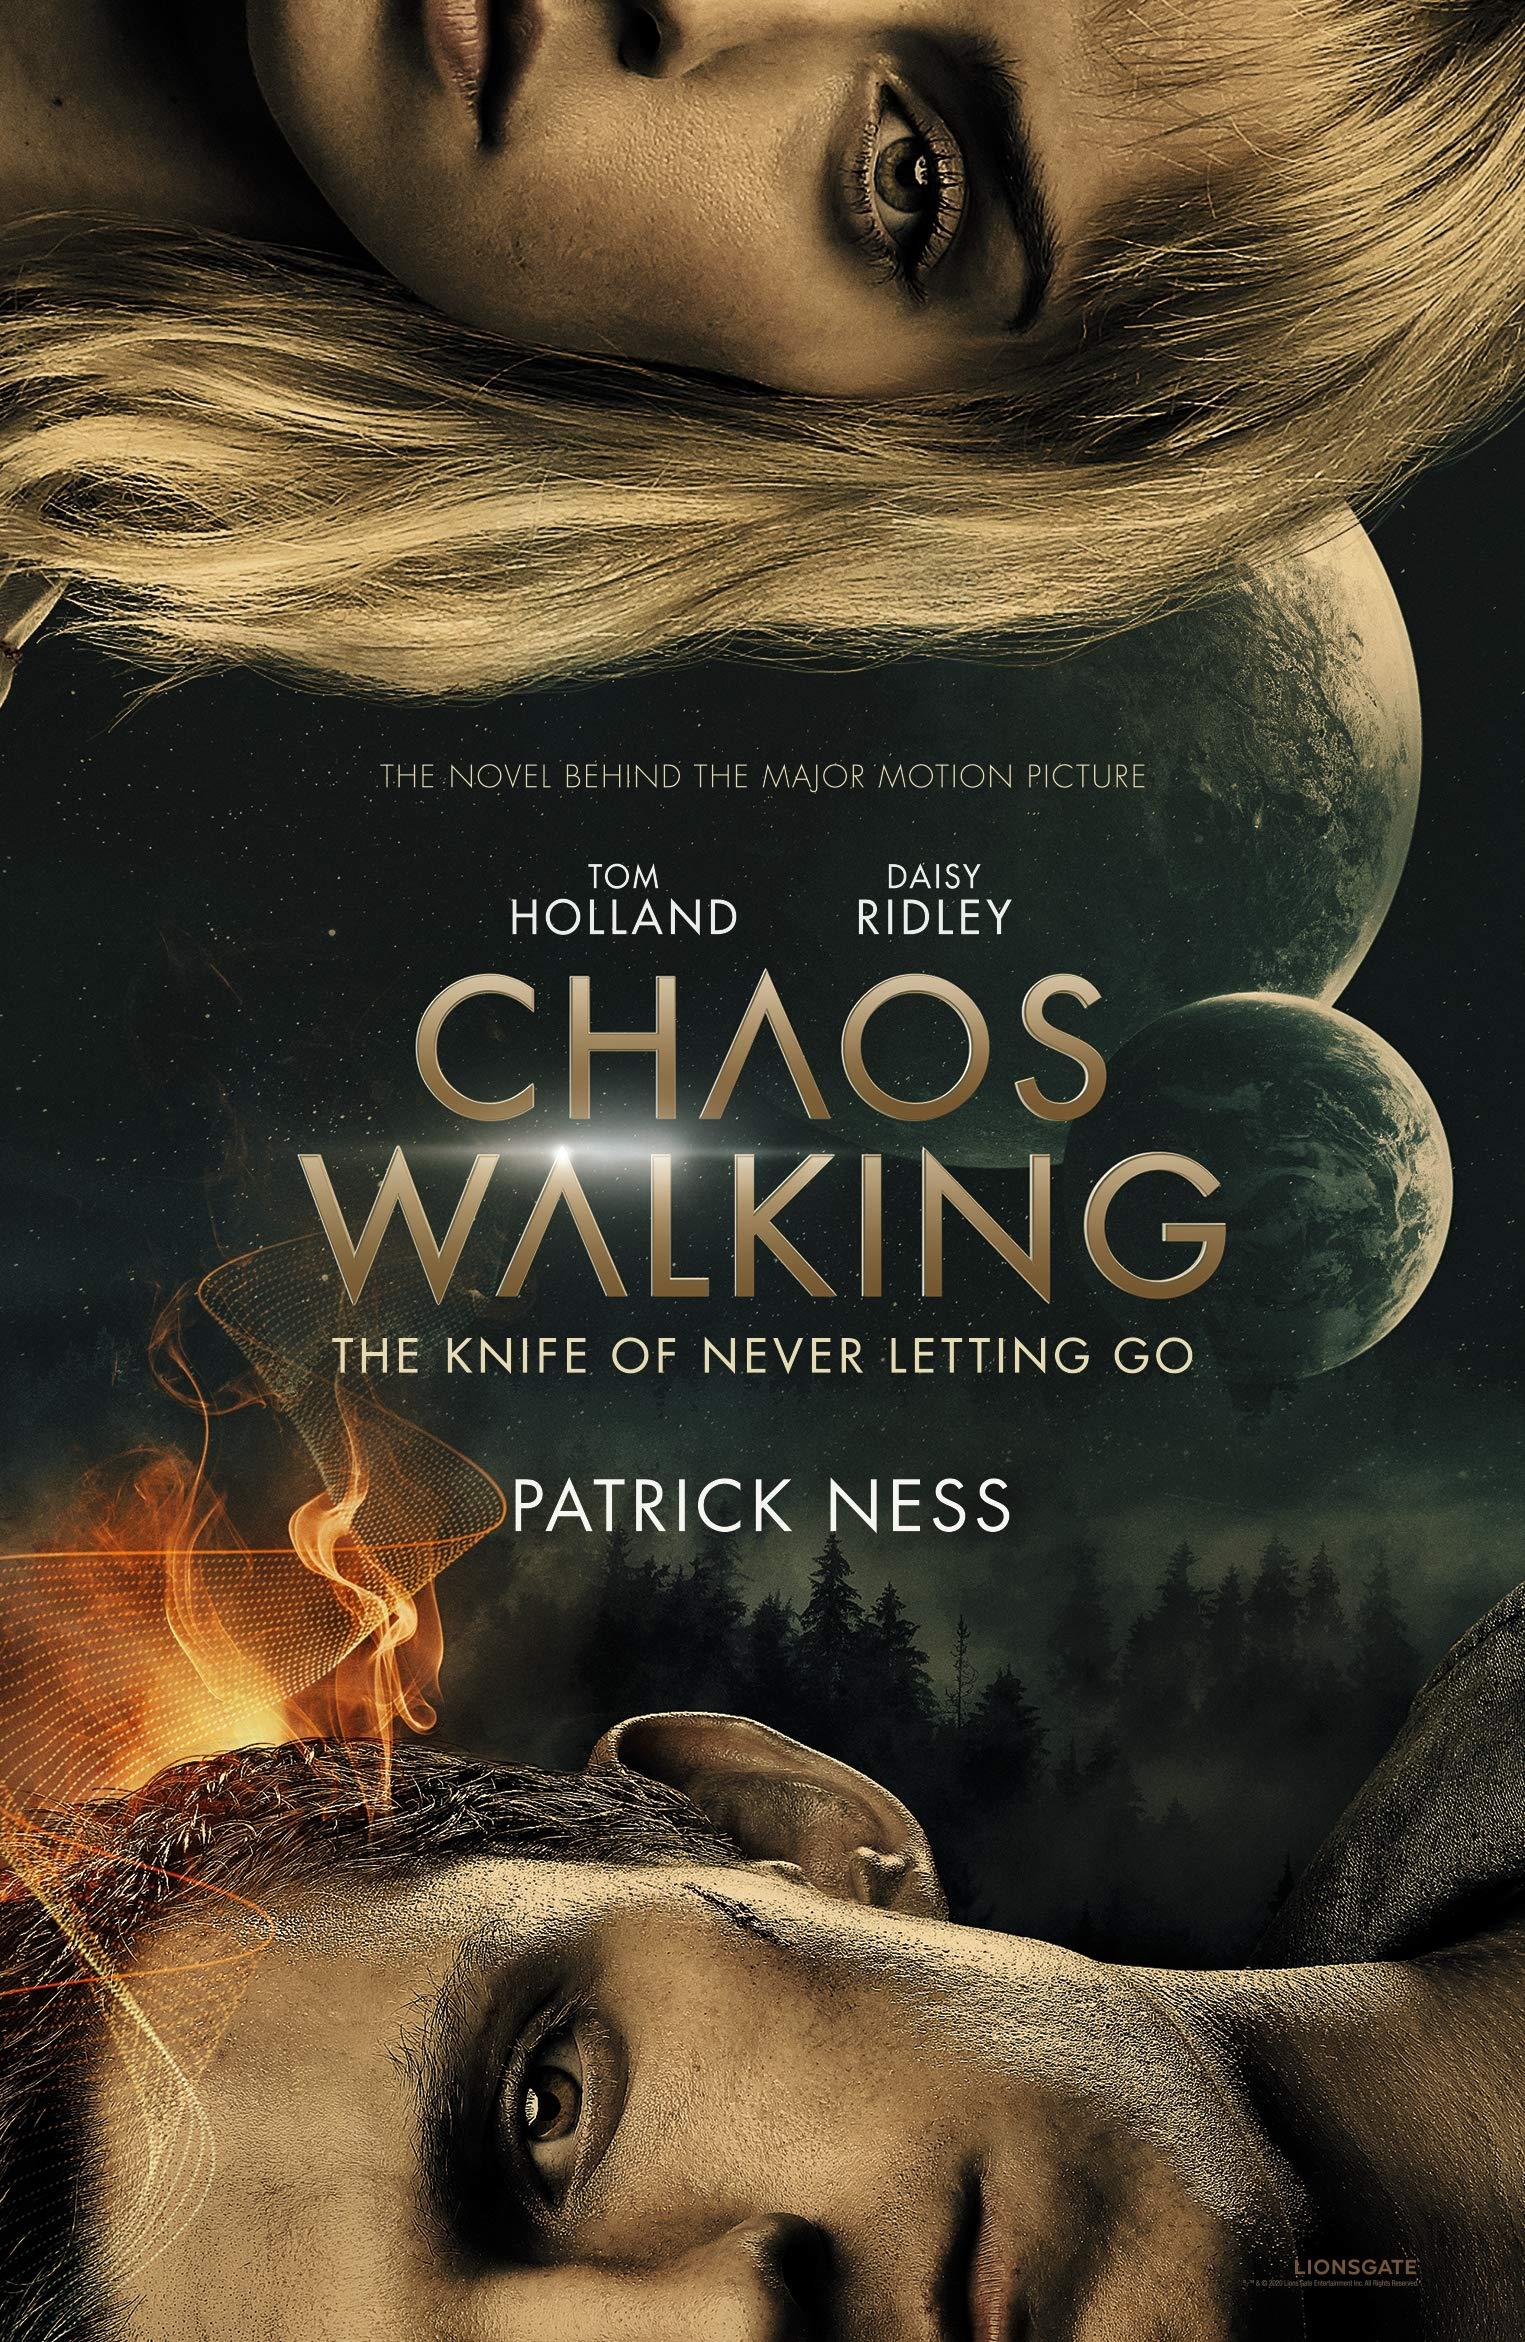 Chaos Walking: The Knife of Never Letting Go (Chaos Walking, 